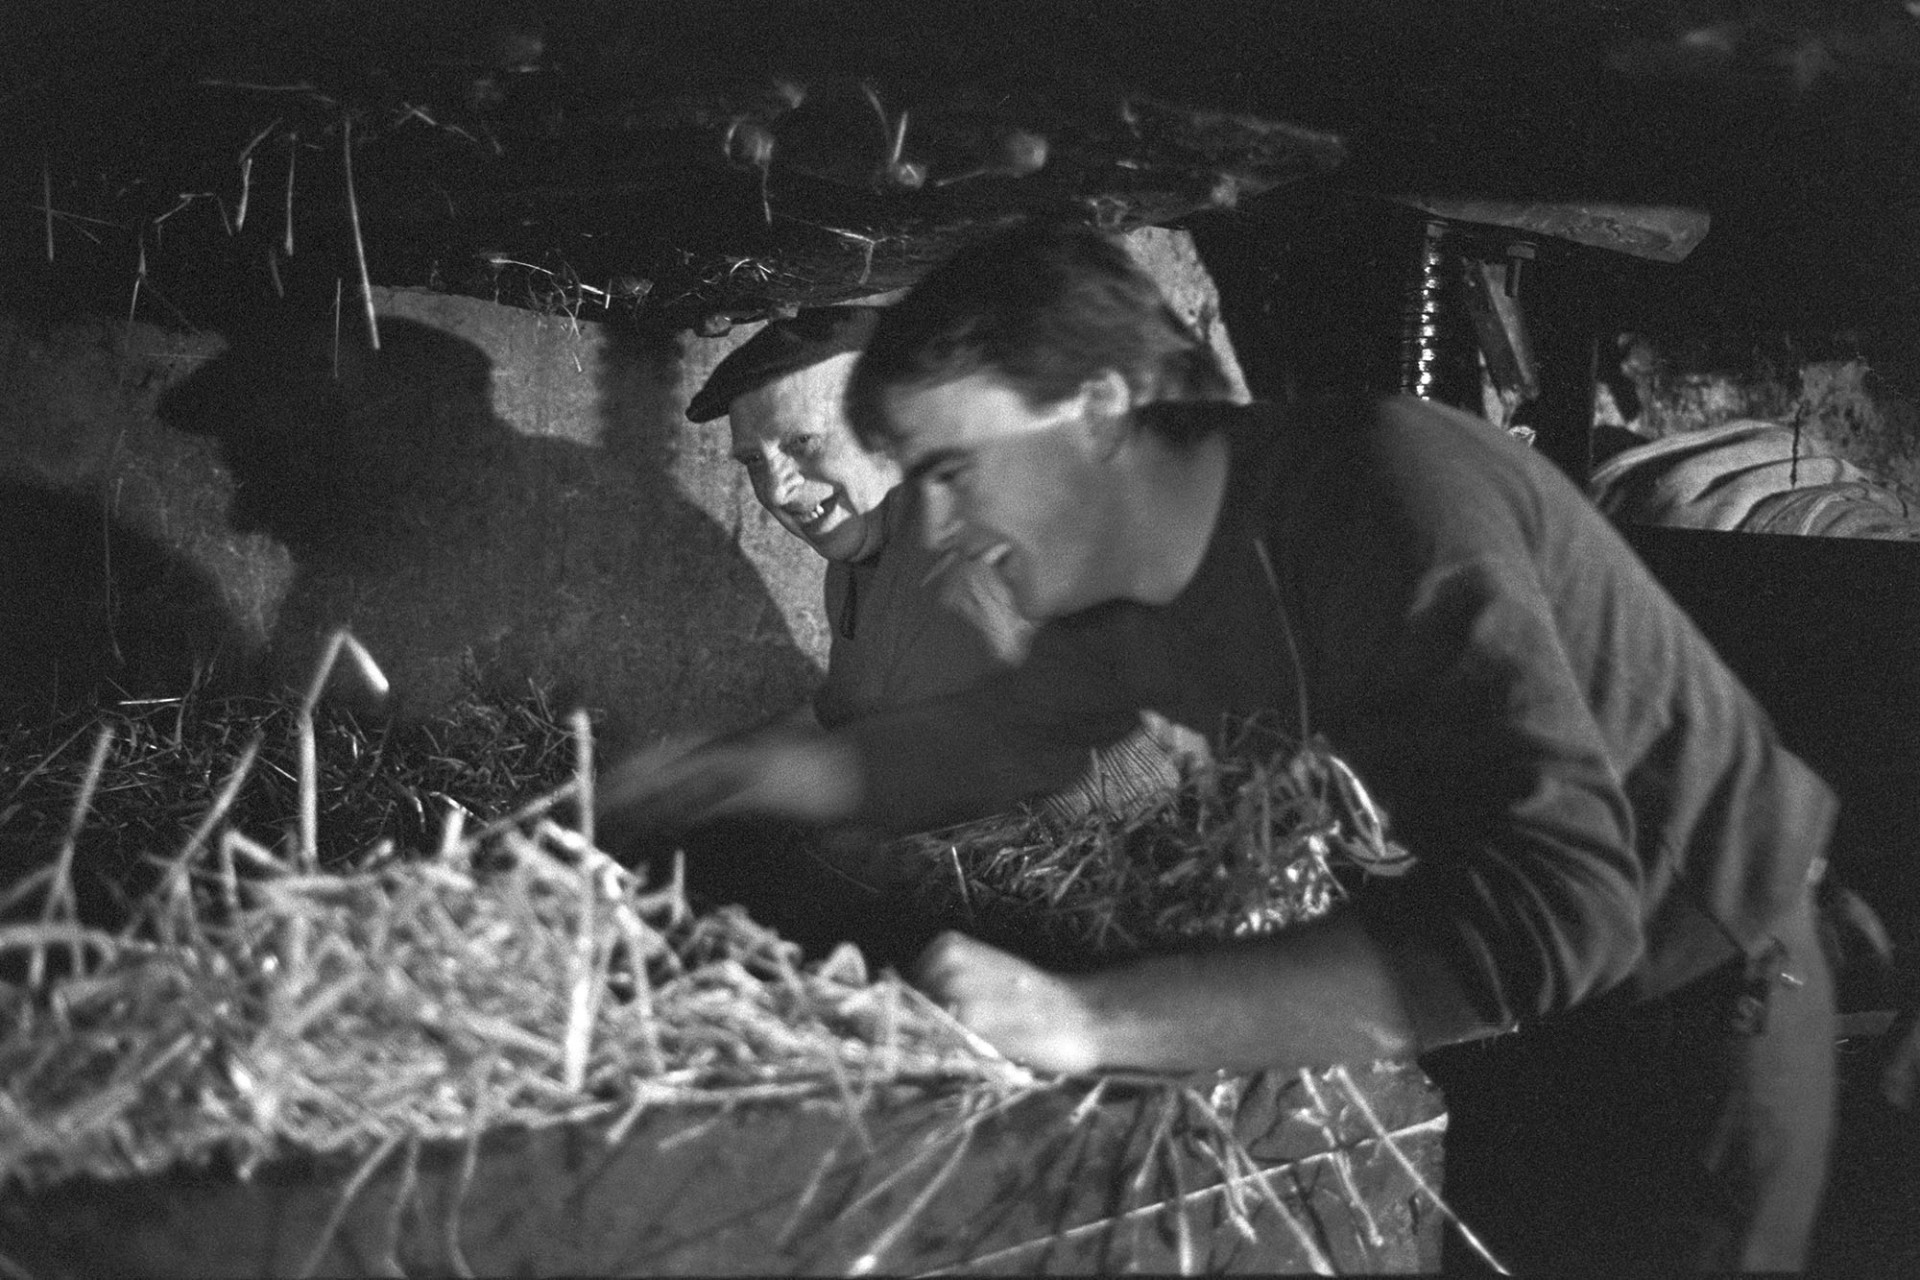 Farmers pressing cider in barn. Experienced man helping the younger generation! See old archive reference b02767. 
[Bill Bending, wearing a cap, showing a younger man, Mr Down, how to use a cider press at Spittle, Chulmleigh.]